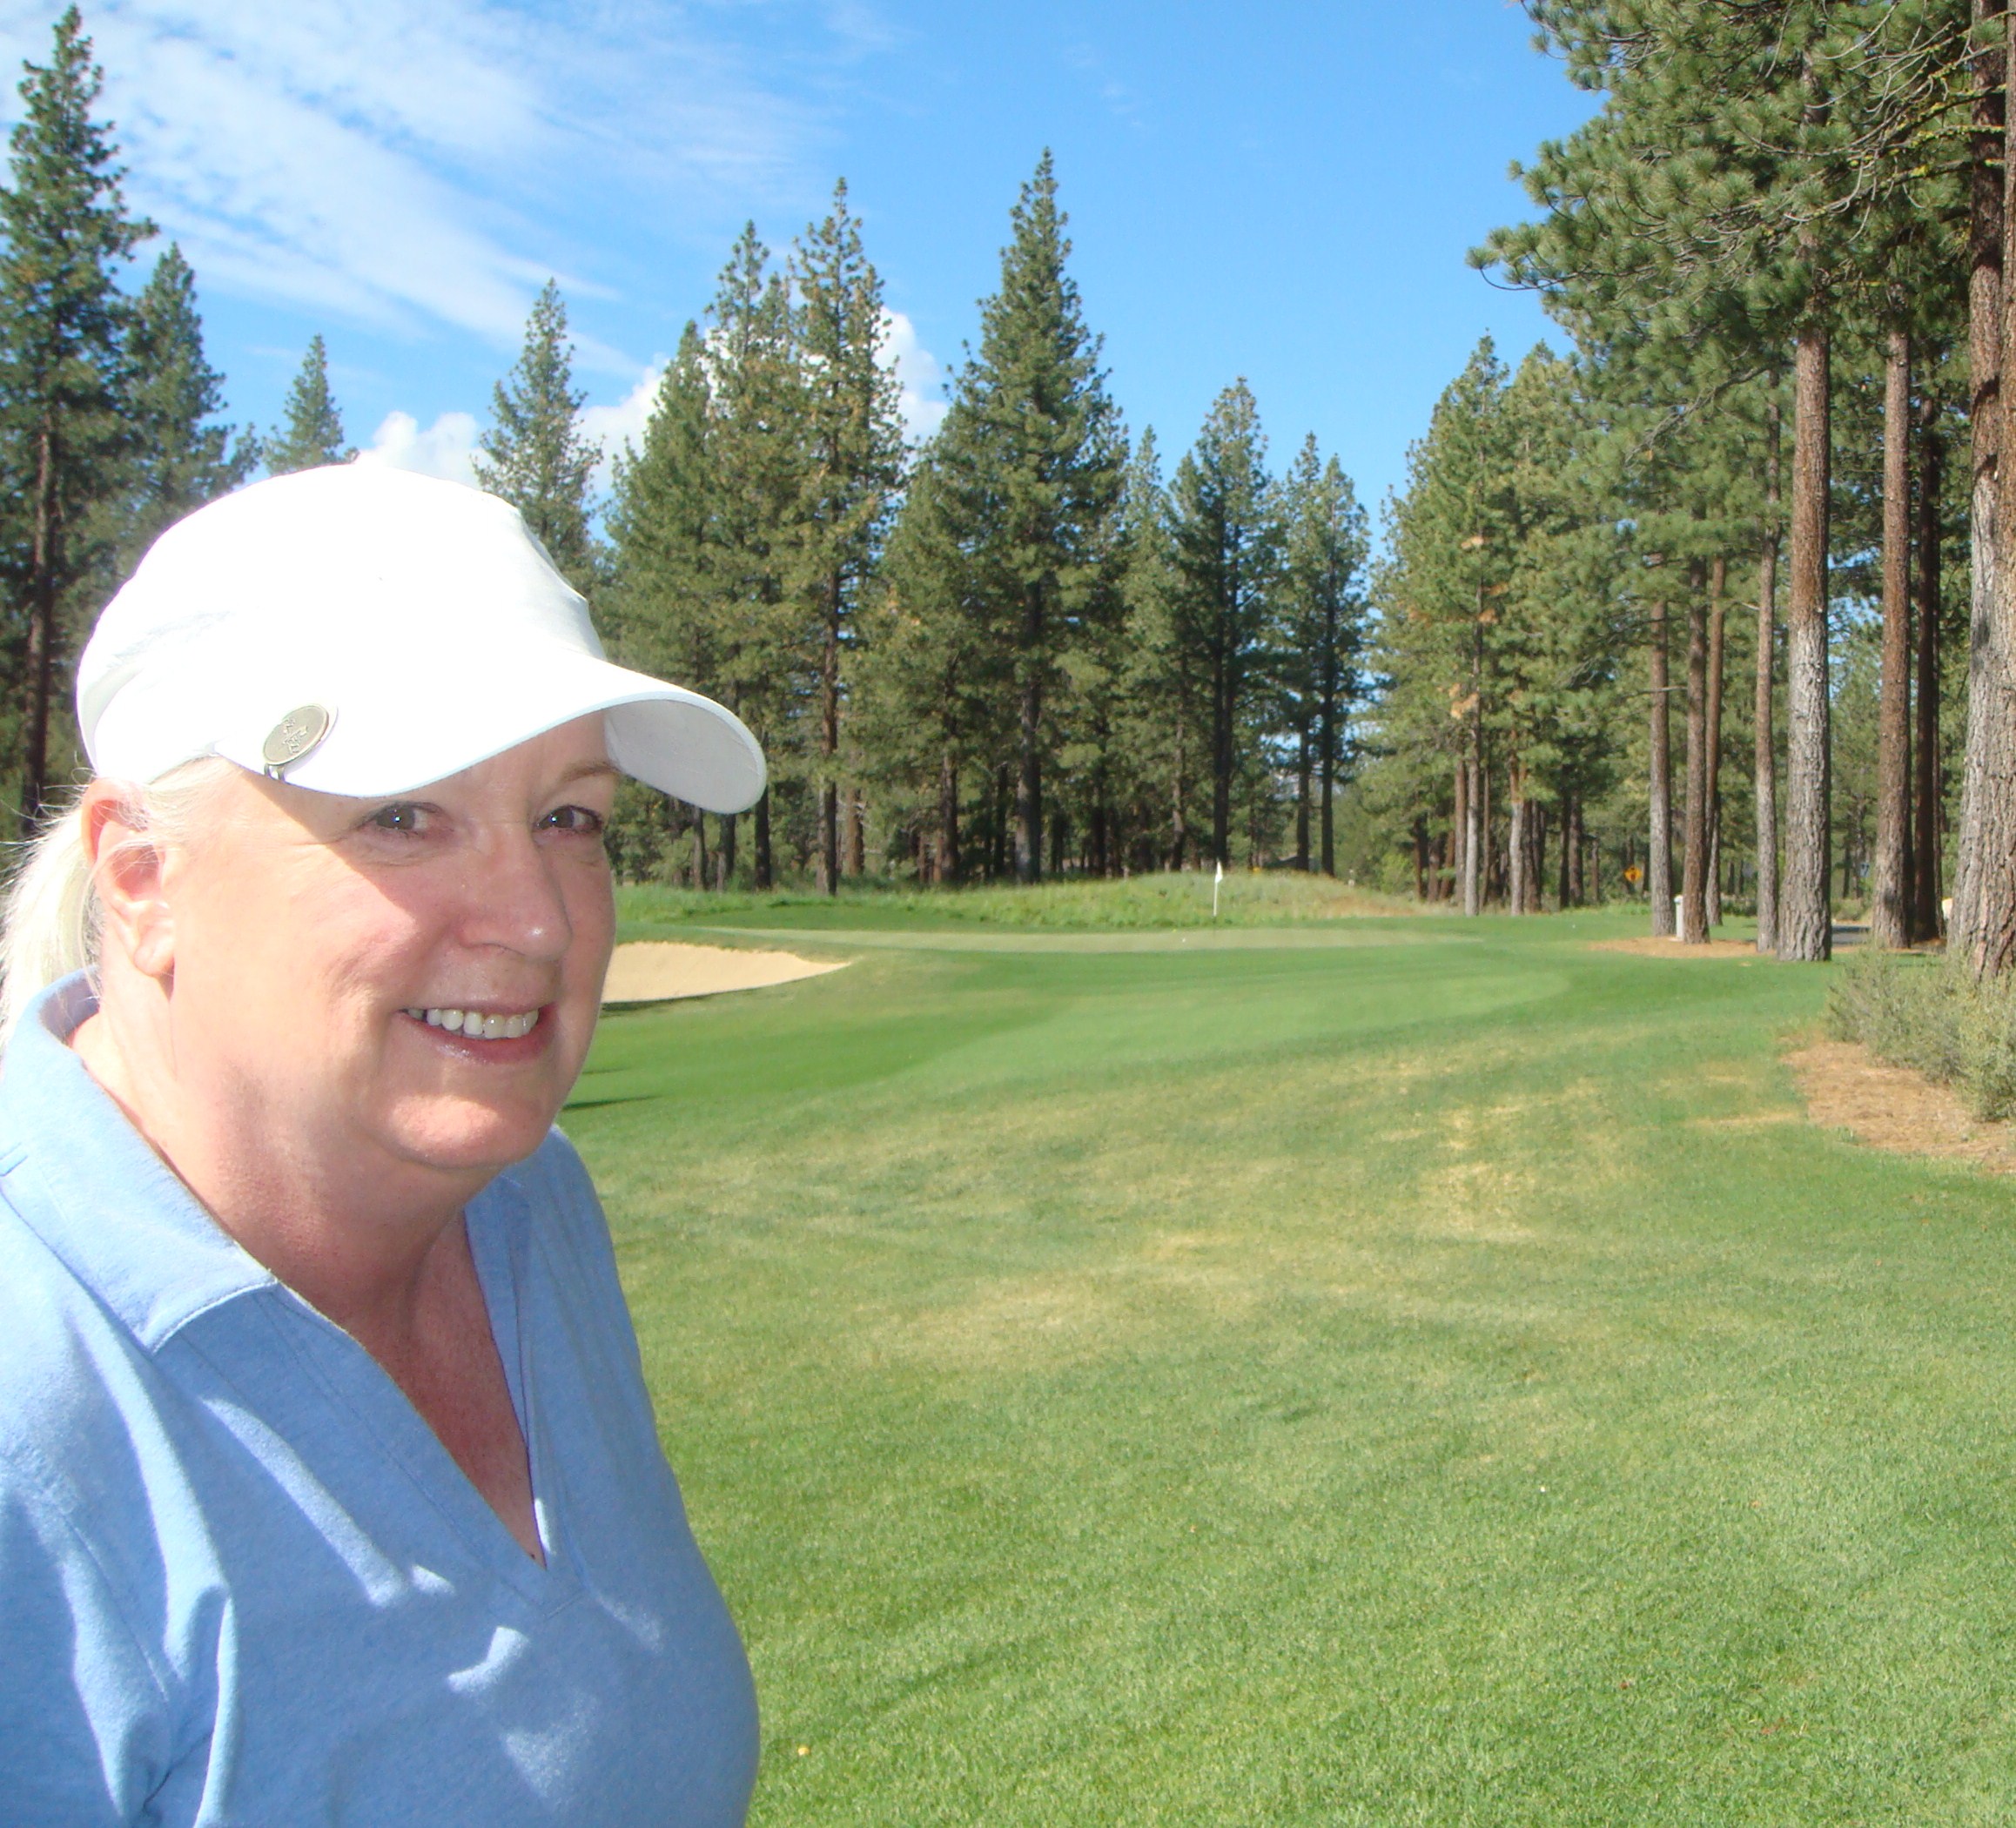 Sharon golfing at Tahoe and getting a birdie.